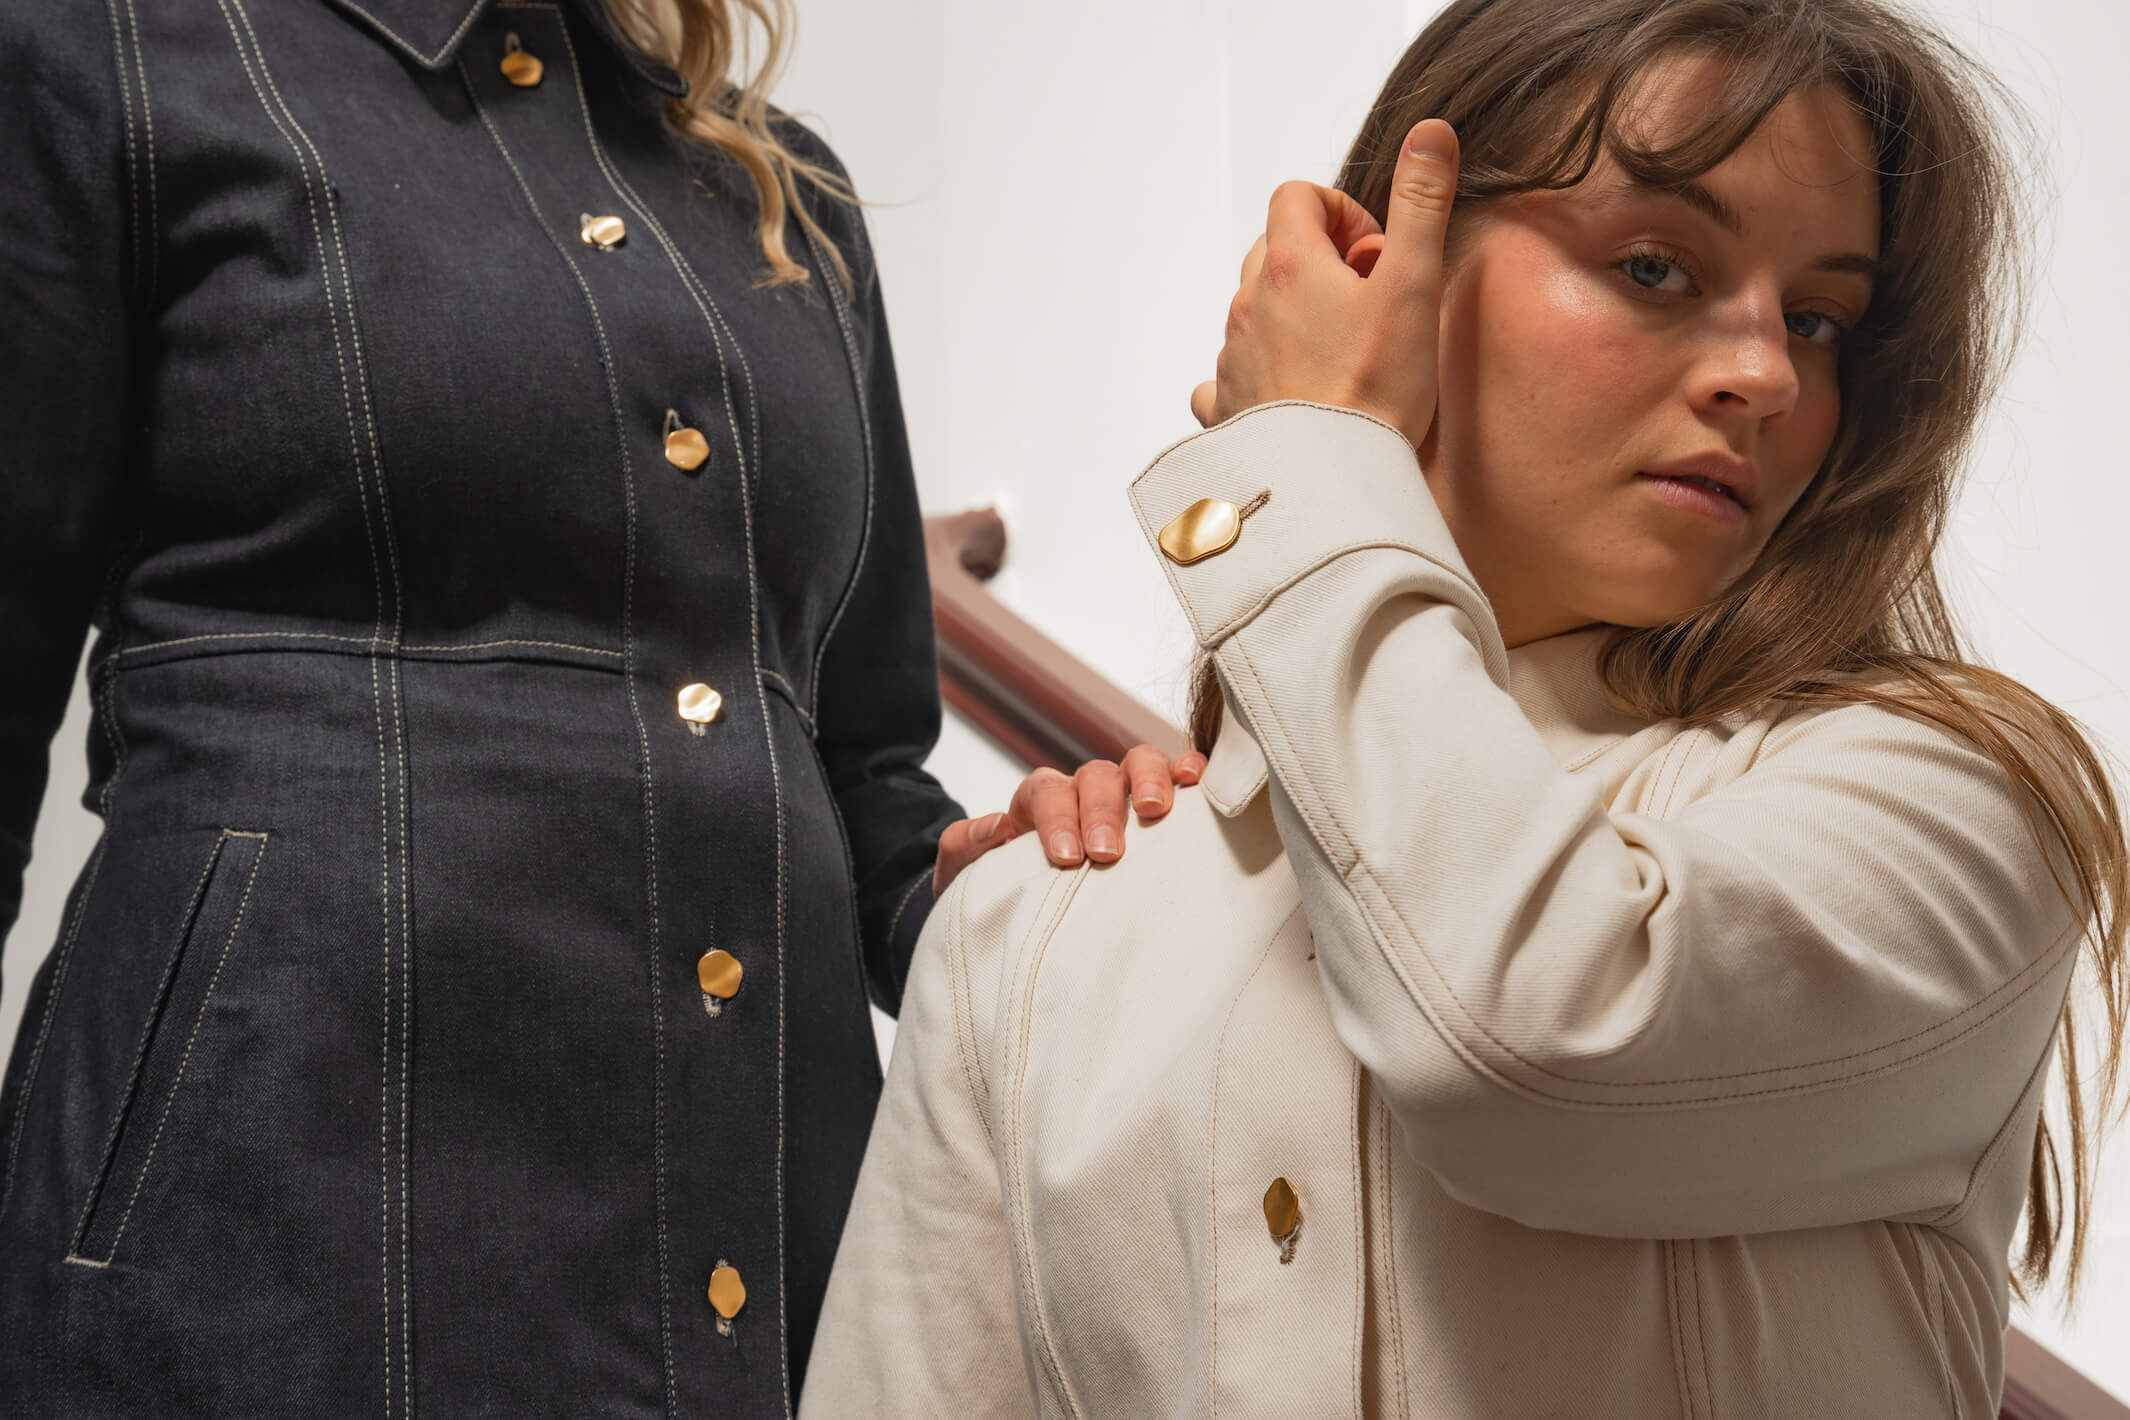 Close-up of two women wearing denim jackets from Cyme Copenhagen's spring/summer 2024 collection. The woman on the left wears a dark denim jacket with gold buttons, while the woman on the right wears a light denim jacket with matching gold buttons. The focus is on the detailed stitching and button design, highlighting the brand's attention to craftsmanship and style.